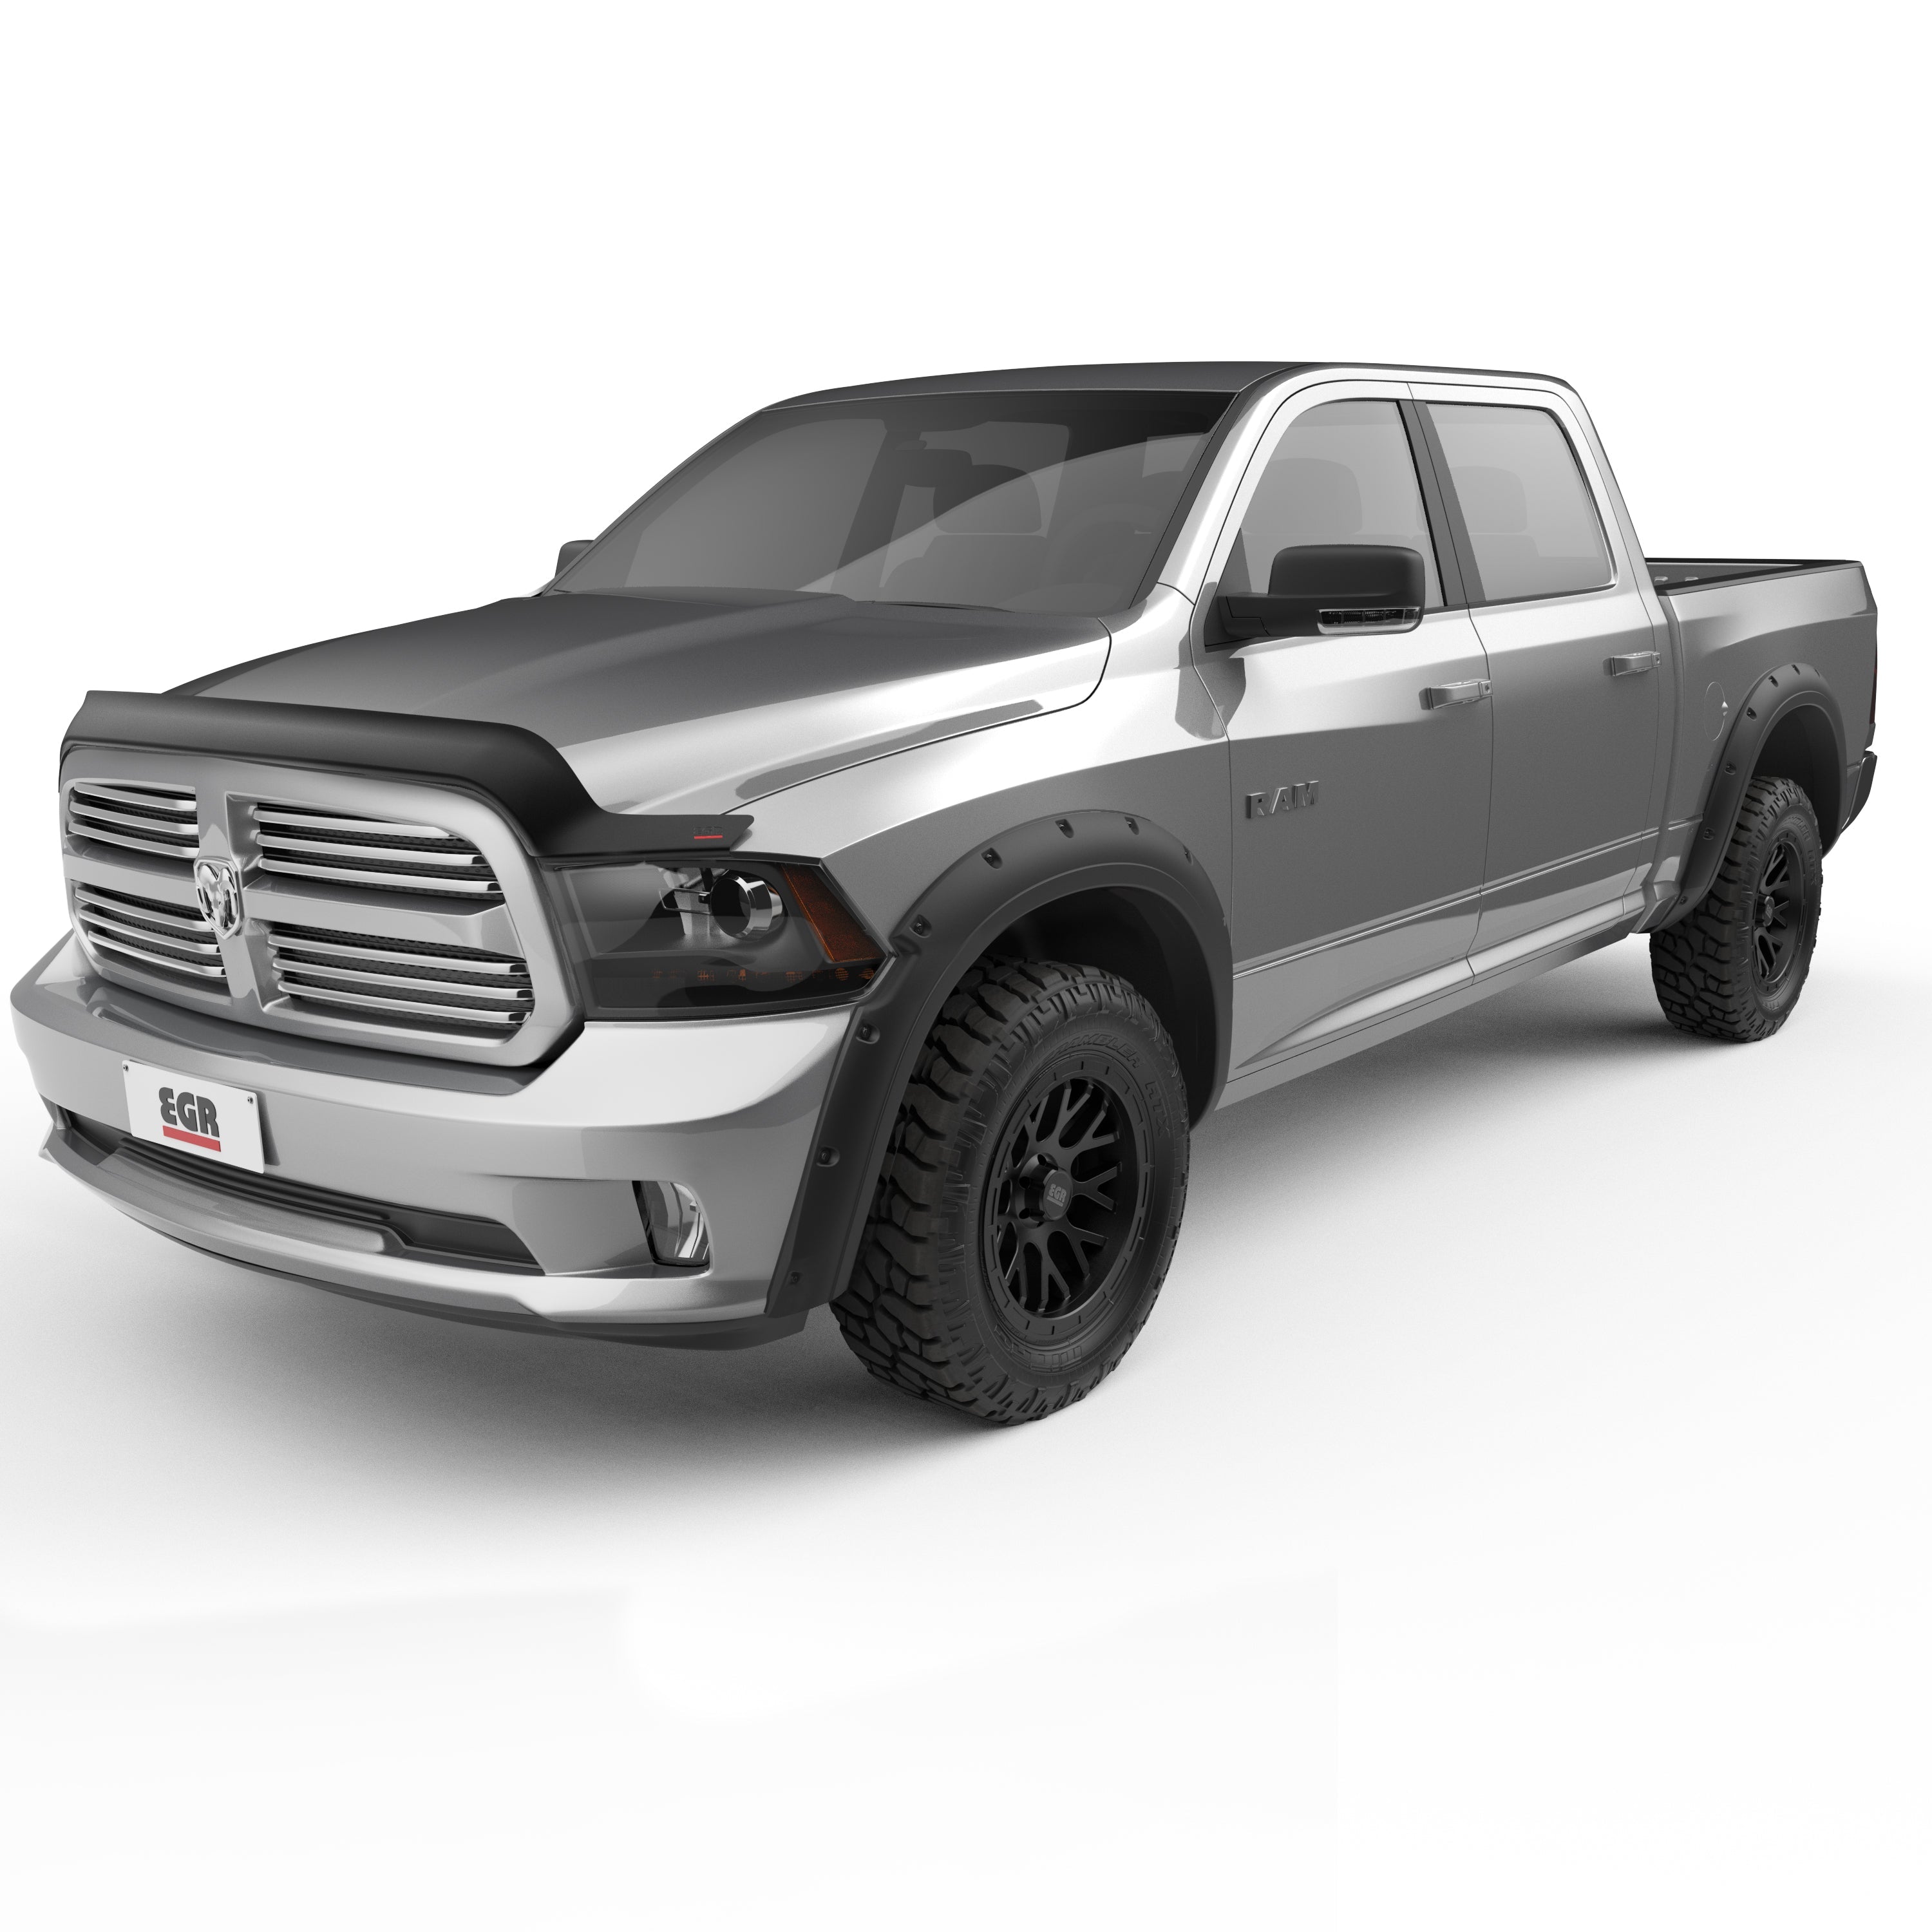 EGR 2011-2018 Dodge Ram 1500 2011-2023 Ram 1500 Classic Crew Extended Cab Pickup 4 Door Traditional Bolt-On Look Fender Flares With Black-Out Bolt Kit 792755